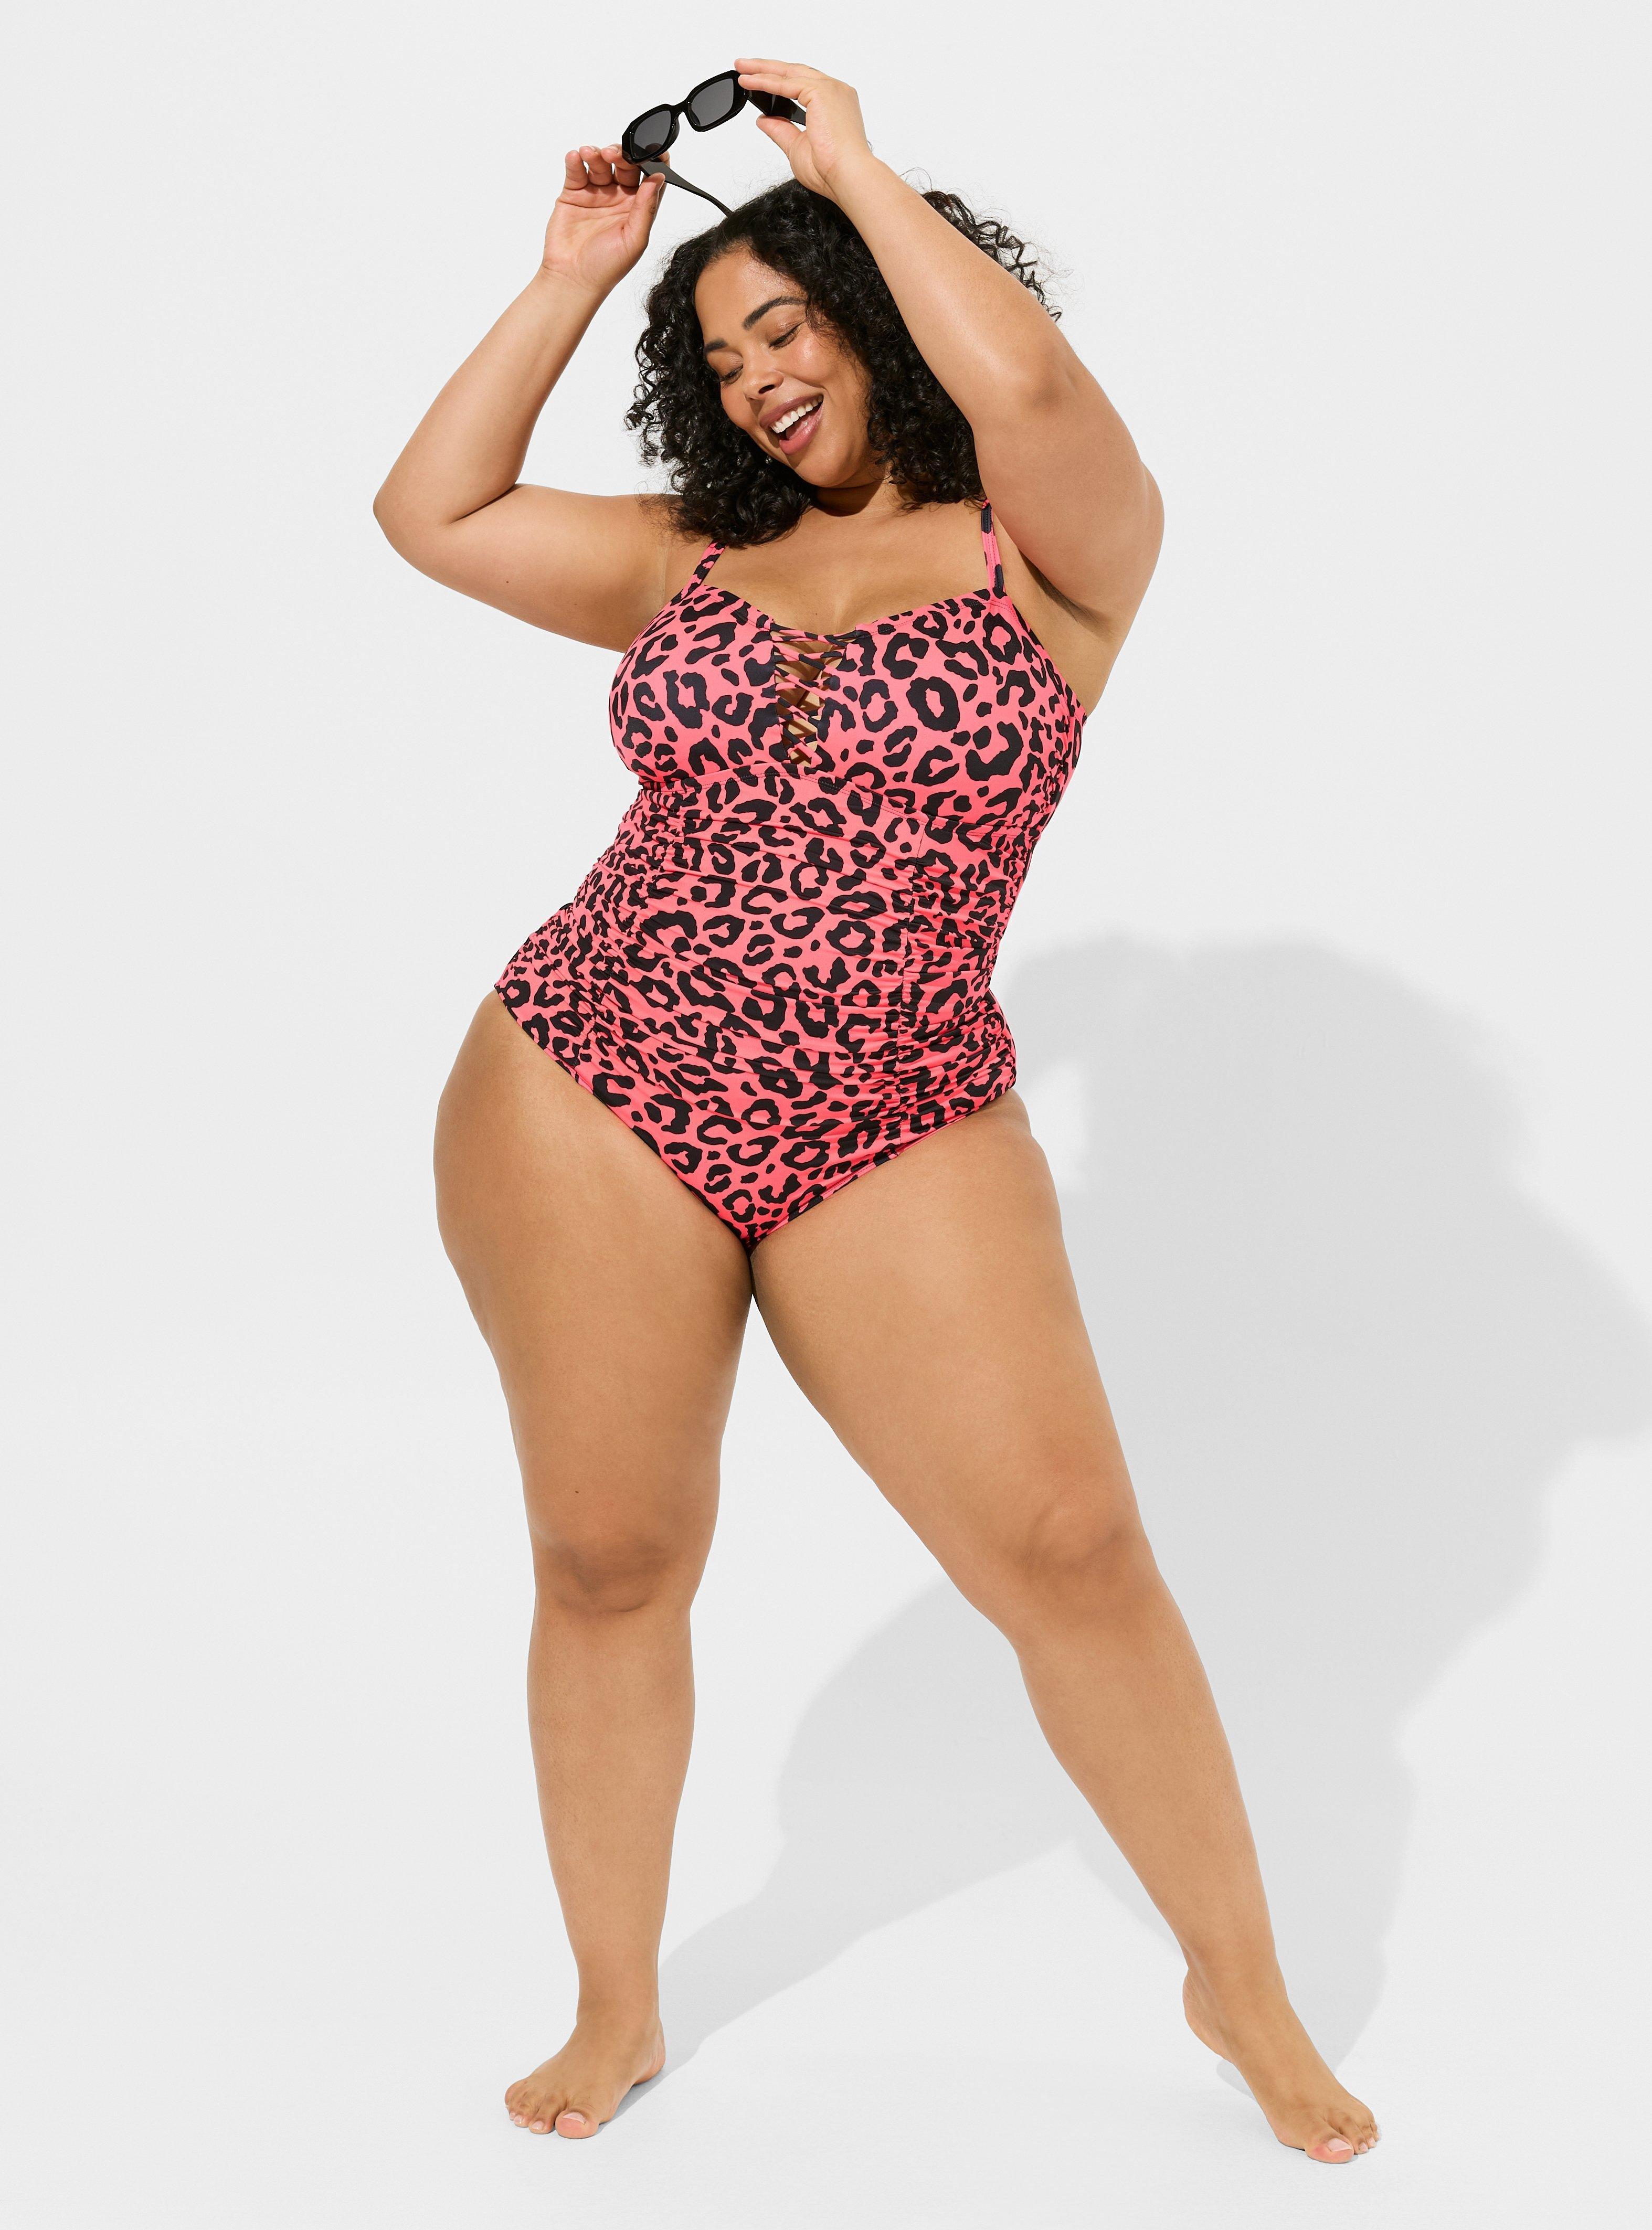 Meet the sexiest summer shapewear now in a sweet, all-new coral